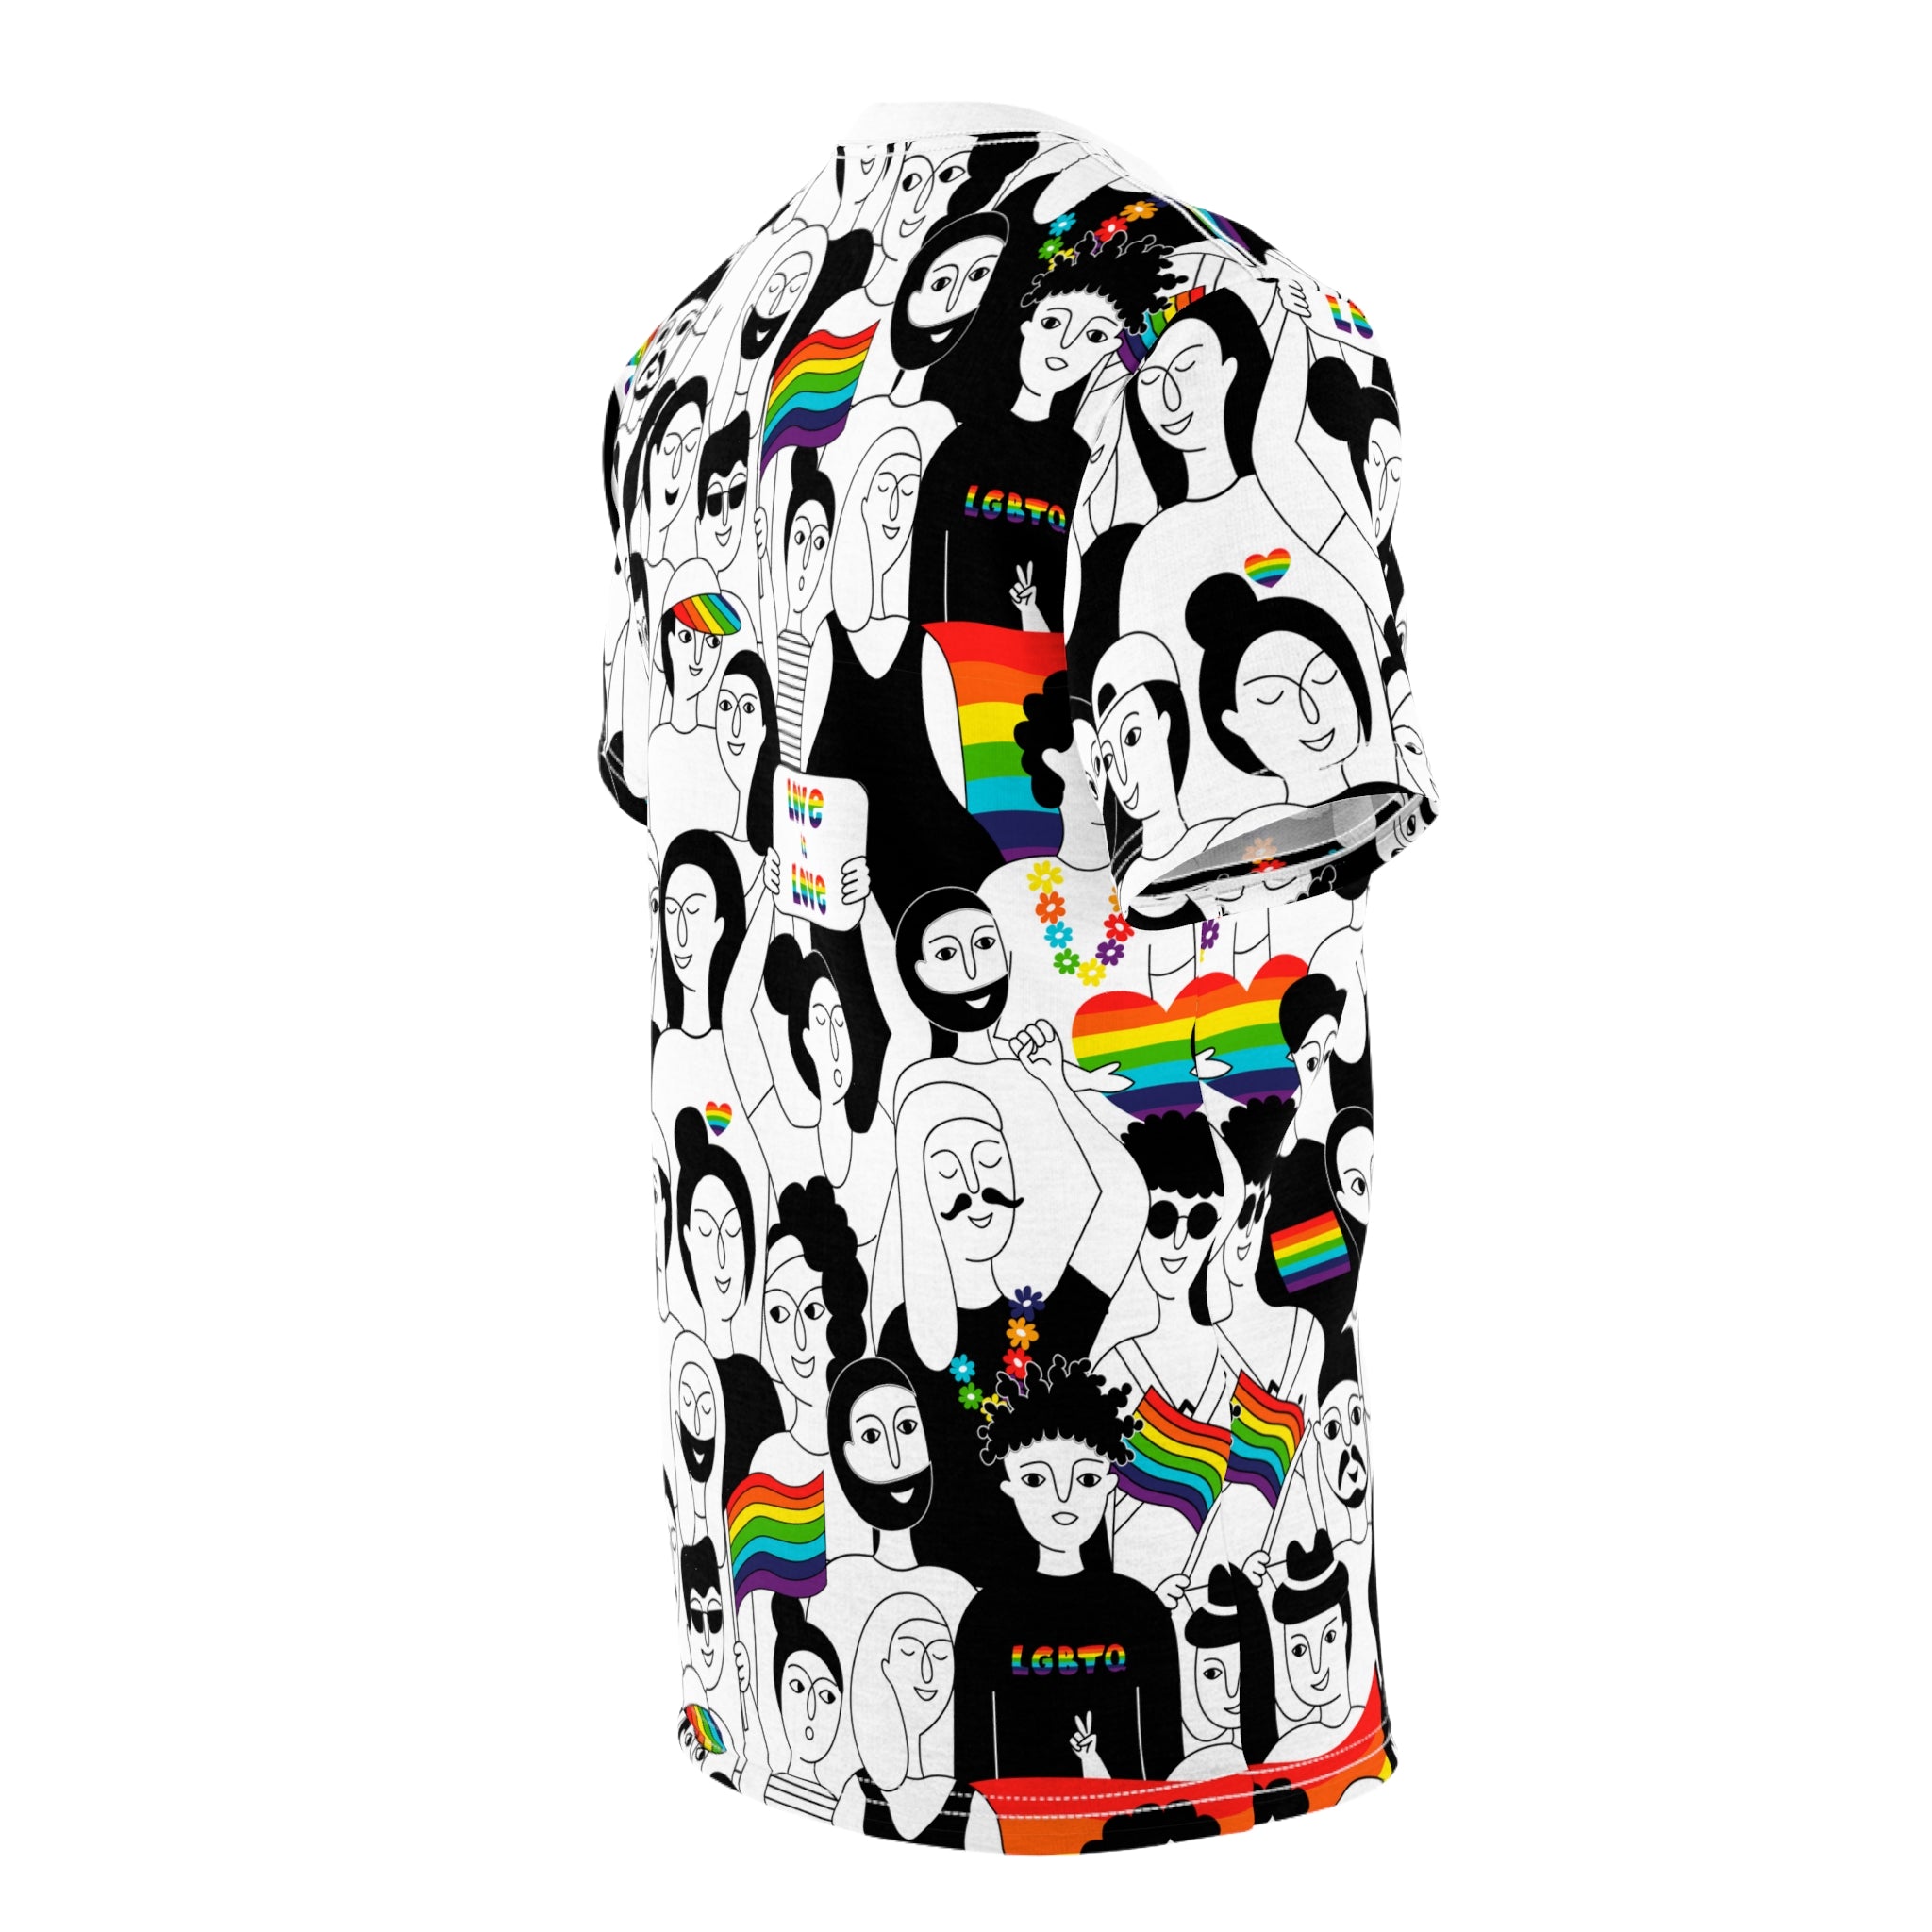 Love is Love Gay Pride Rainbow Flag All Over Print Unisex Graphic Tshirt